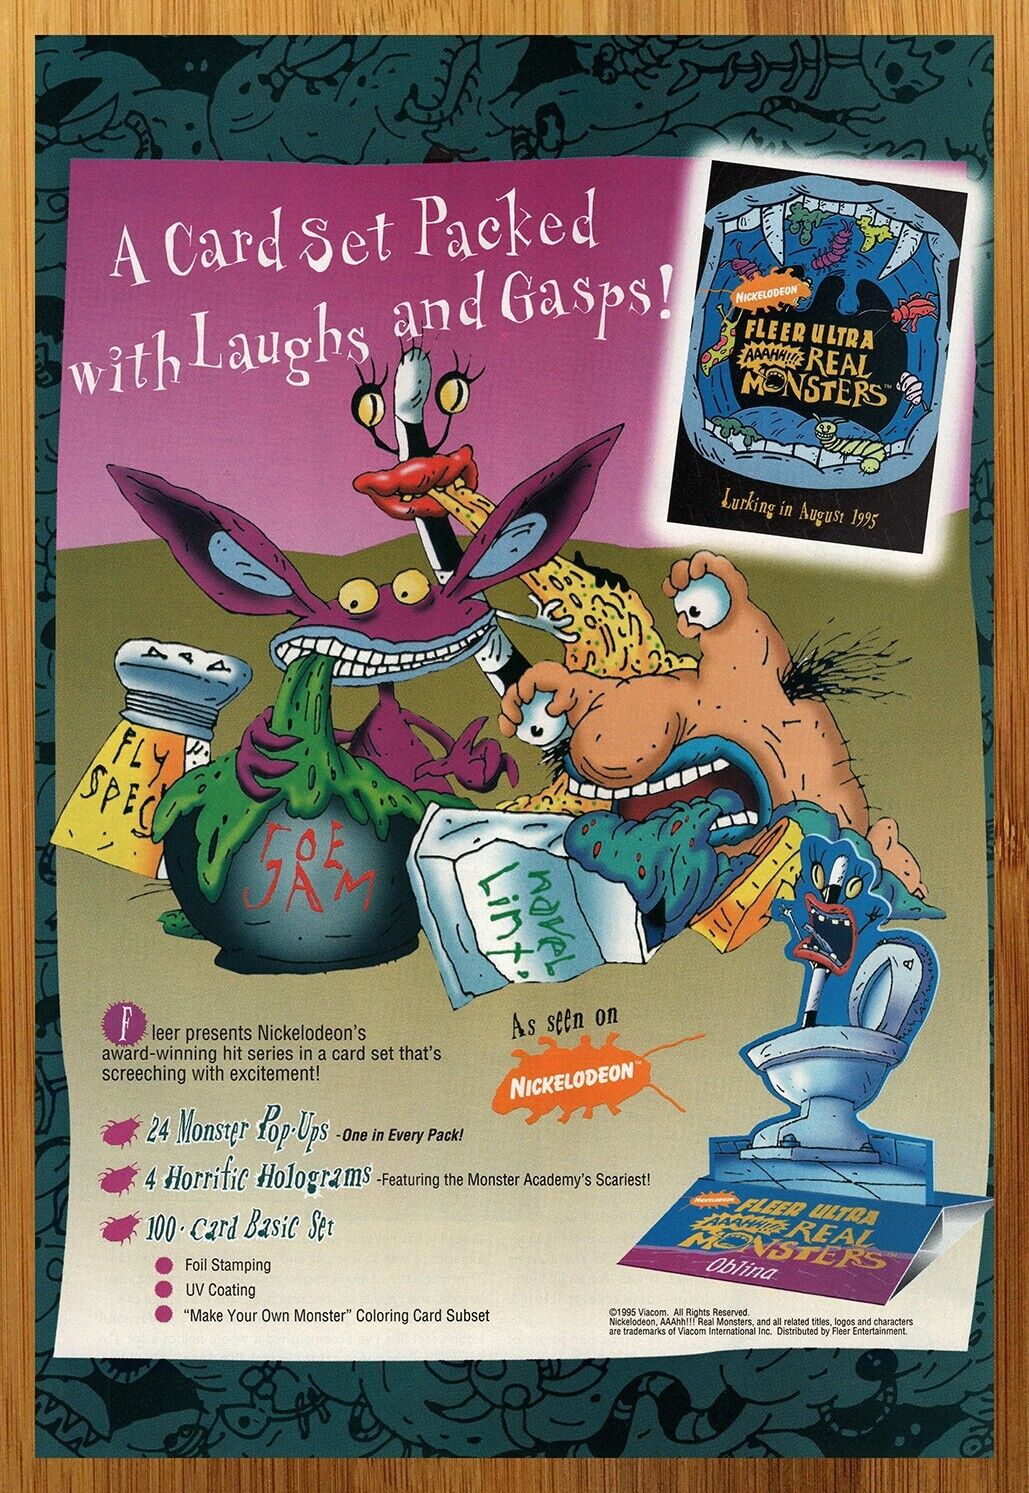 1995 AAAHH Real Monsters Trading Cards Print Ad/Poster 90s Nickelodeon Pop Art